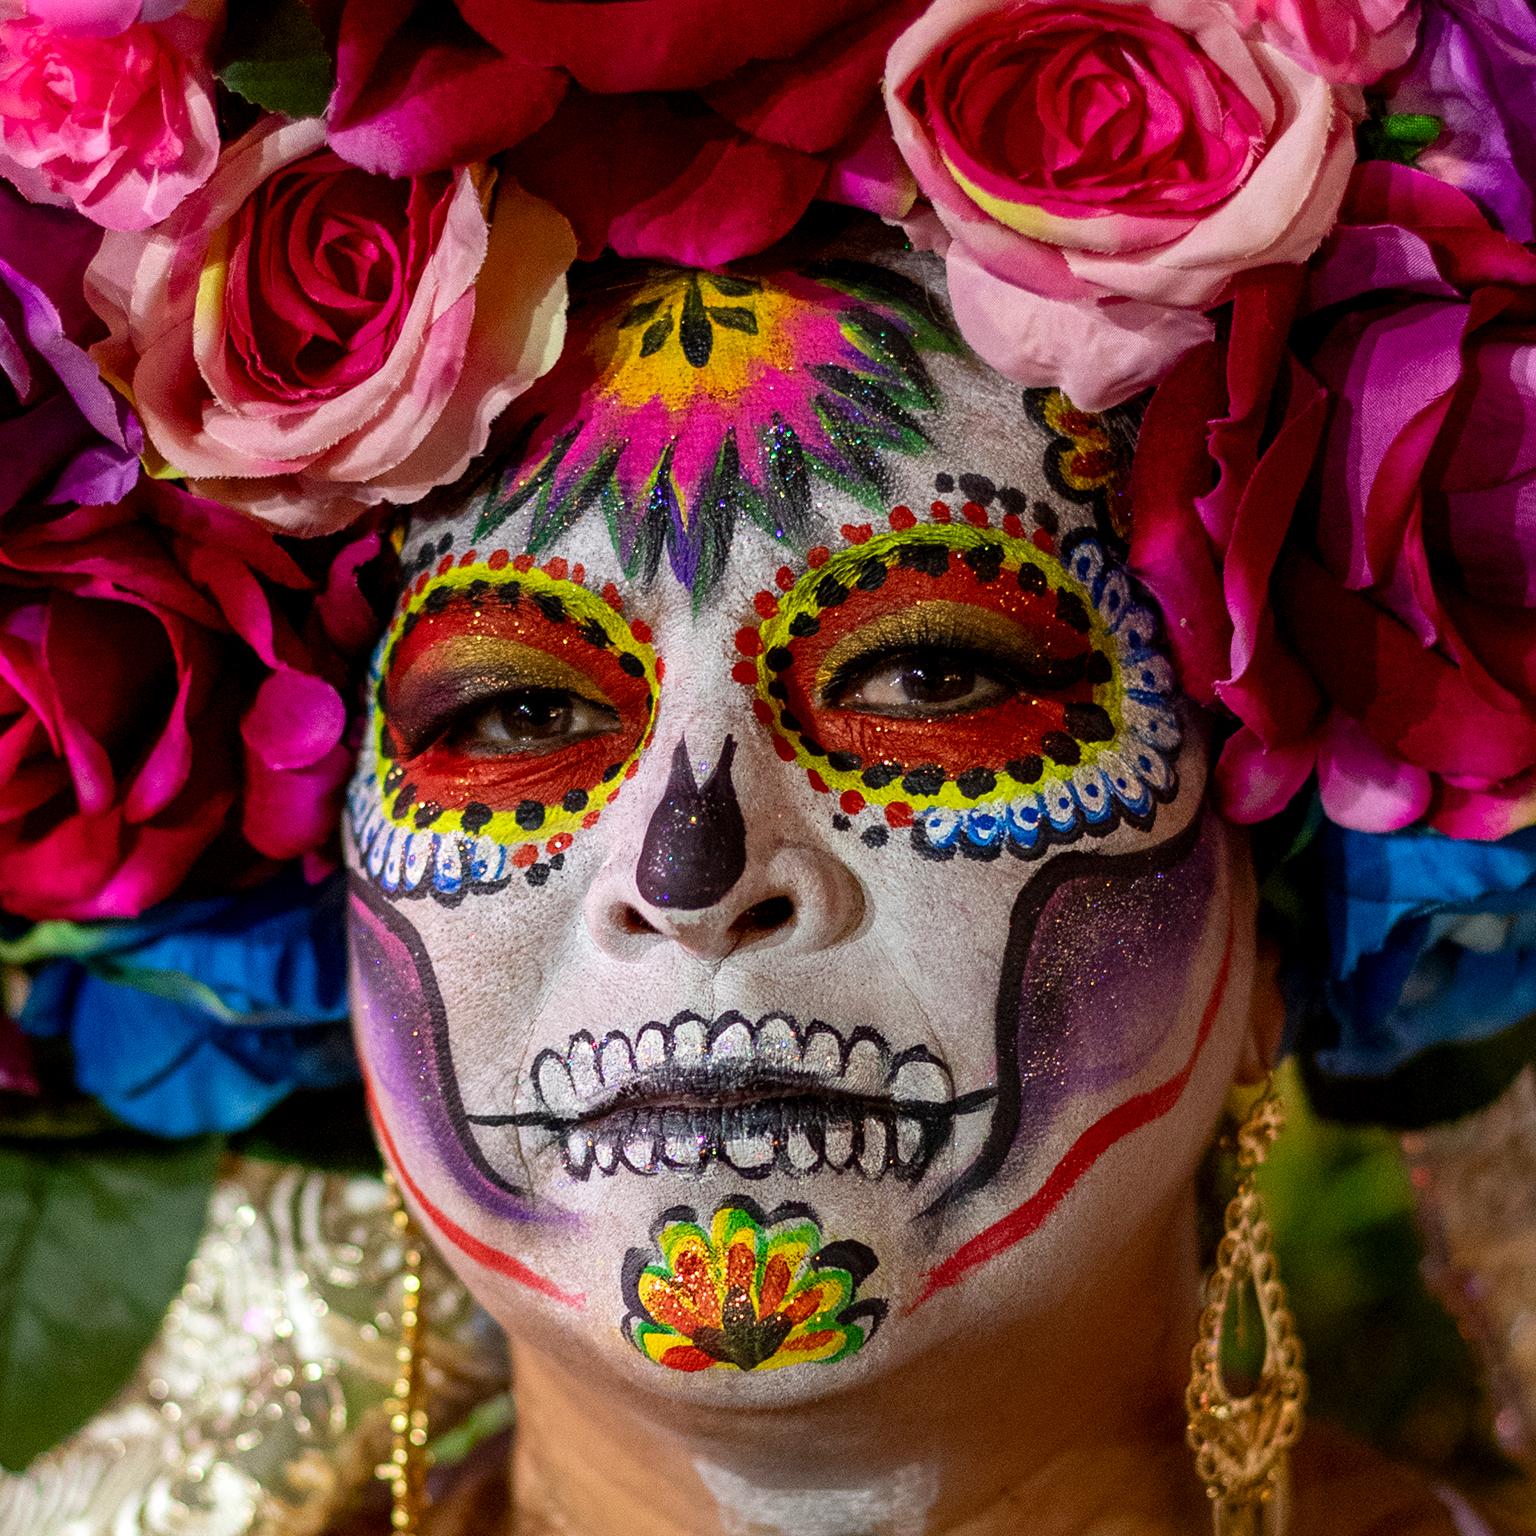 “A crown of roses for death”, Day of the Dead, Dia de los Muertos, Mexico, 2023 - Photograph by  Cosmo Condina